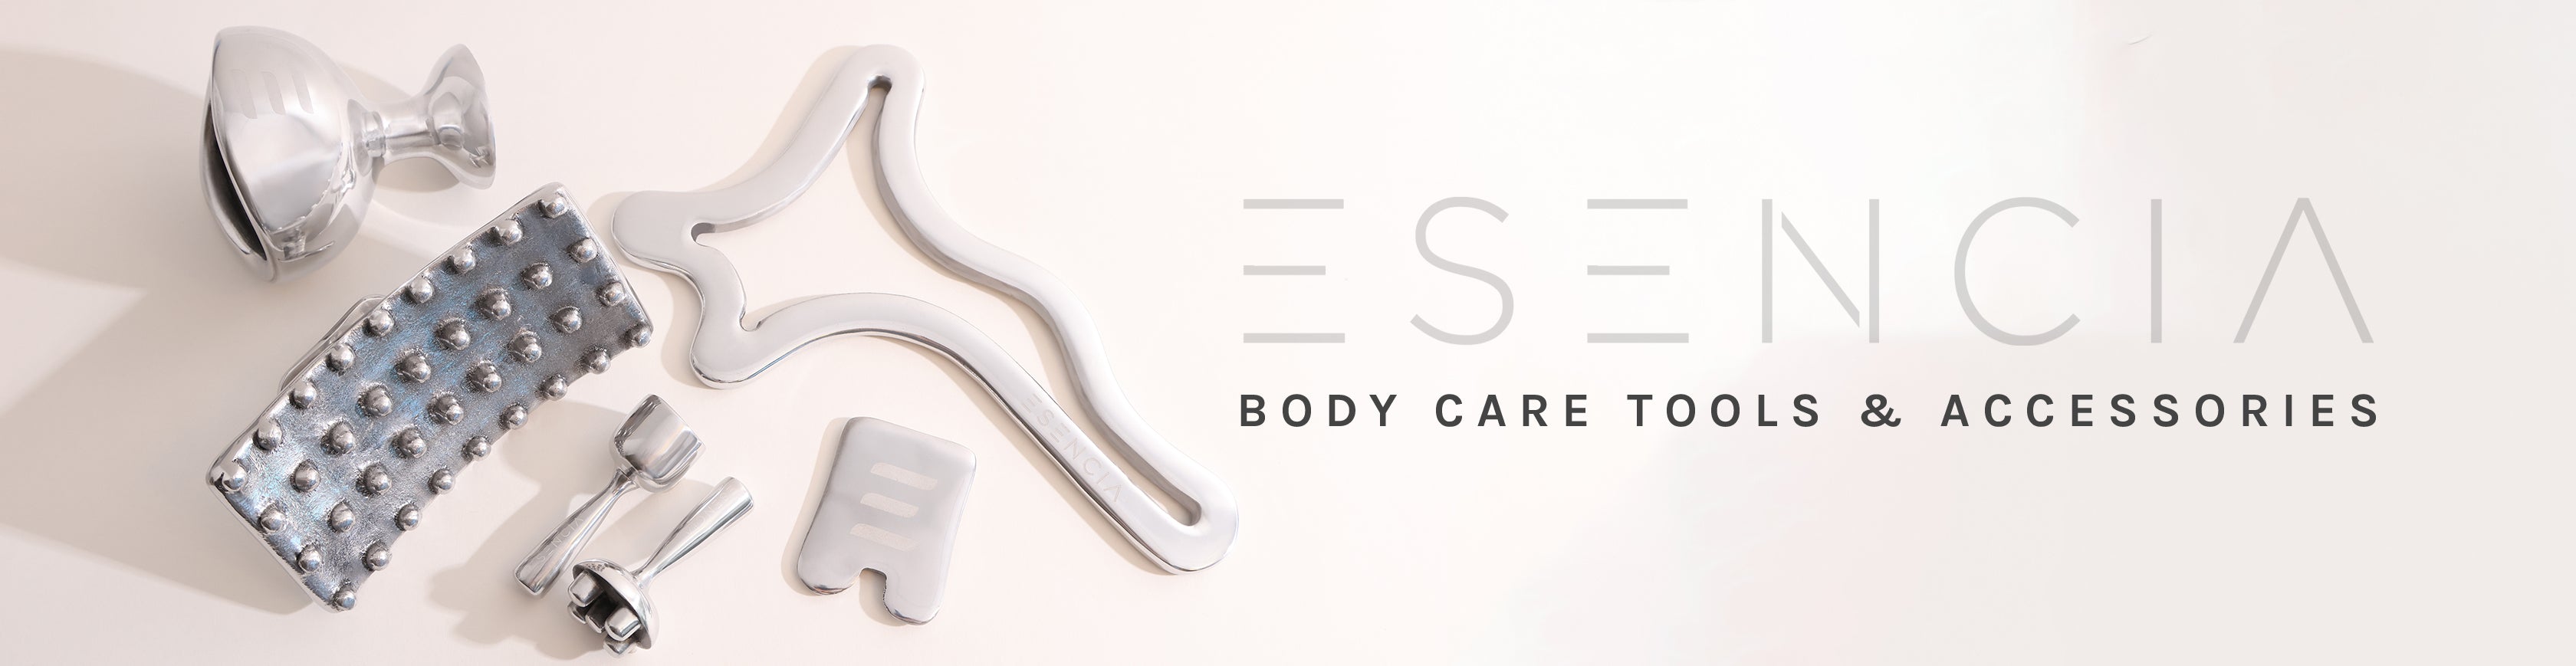 Body Care Tools & Accessories